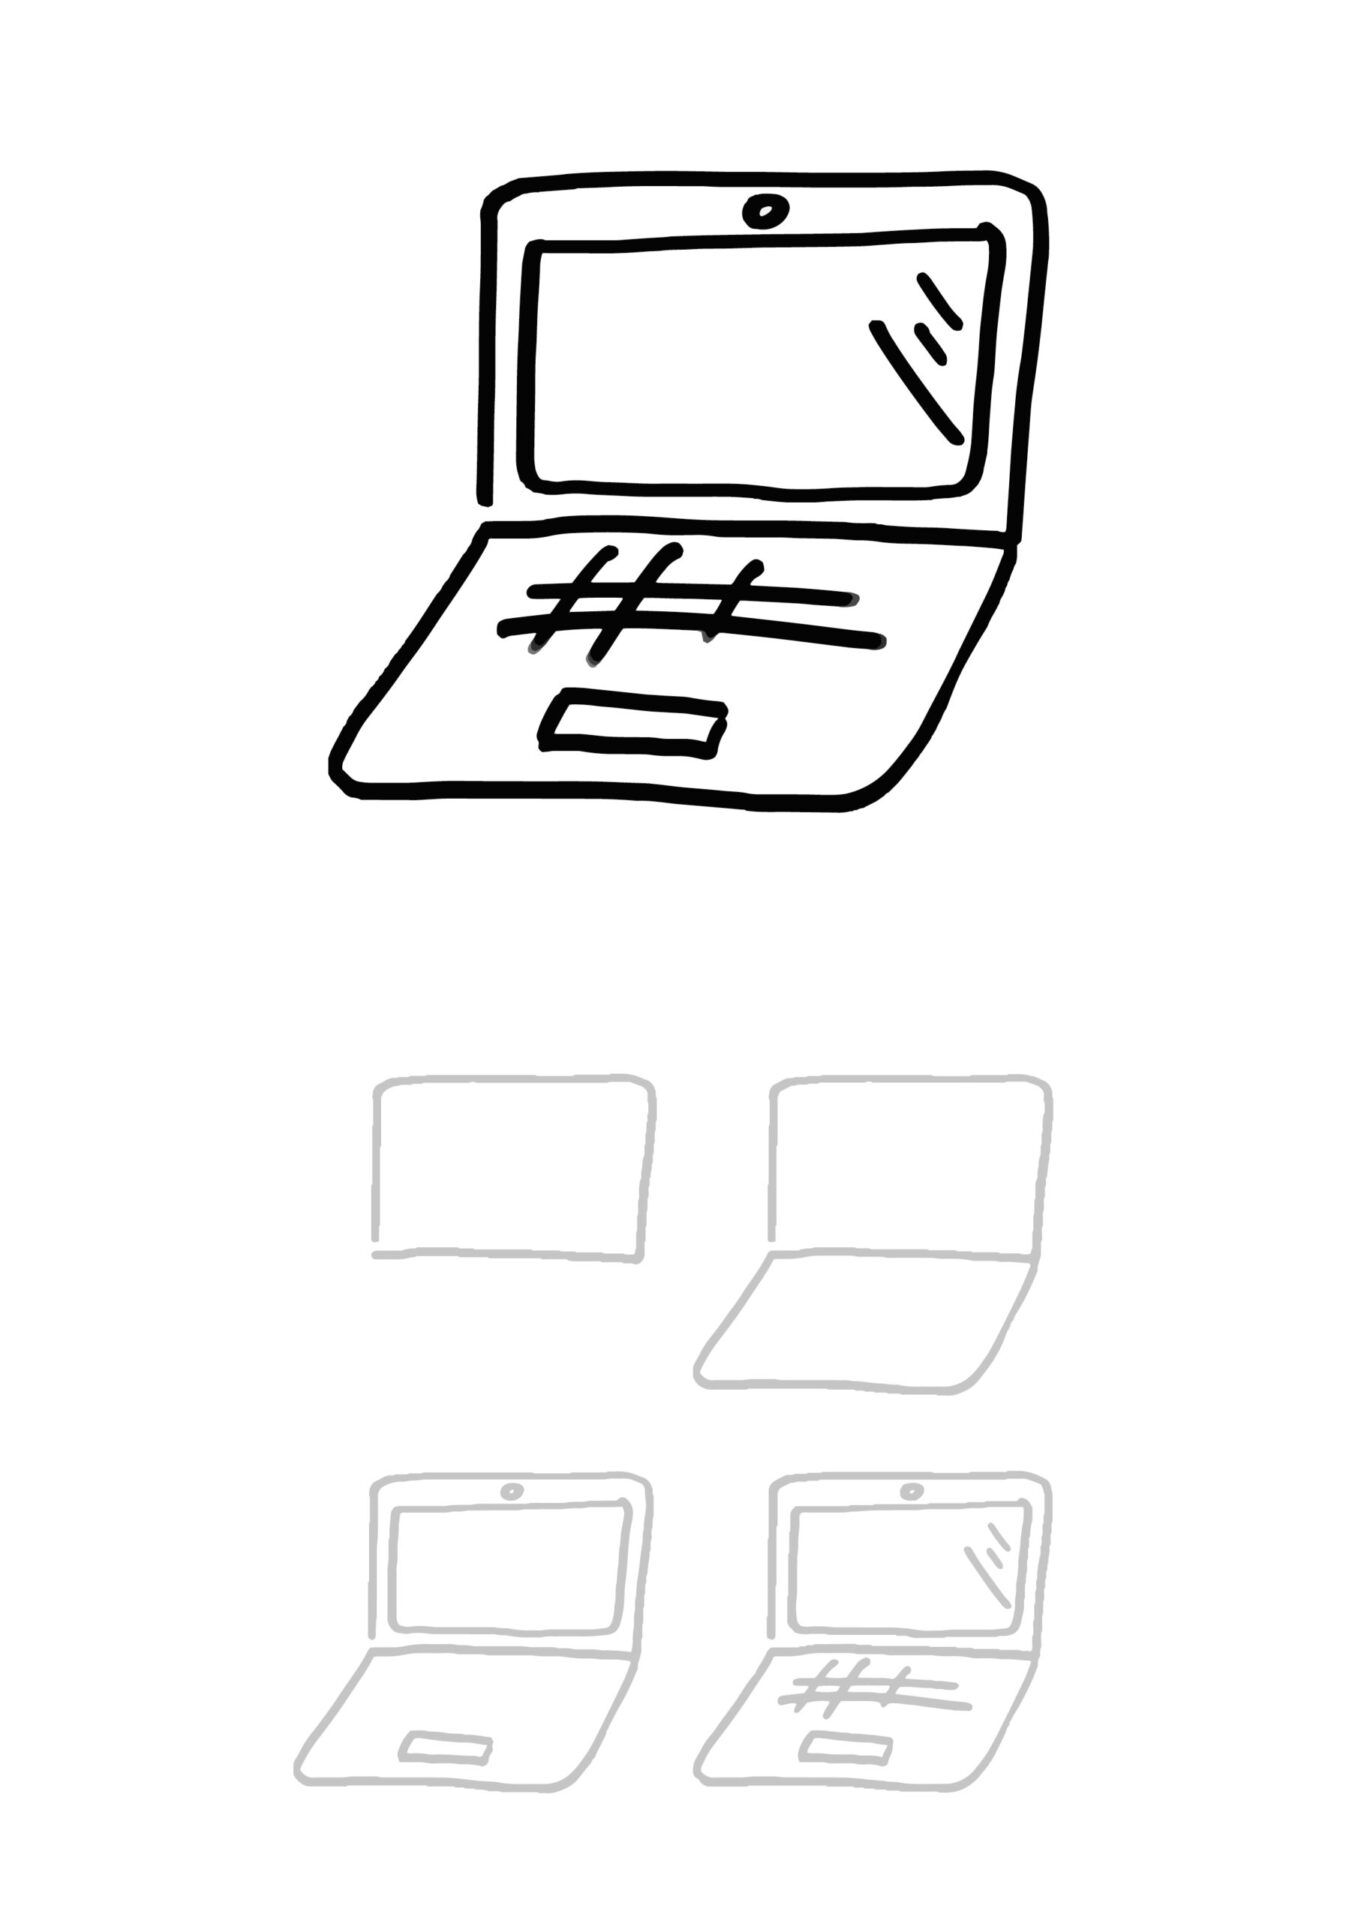 template sketchnotes laptop scaled 1